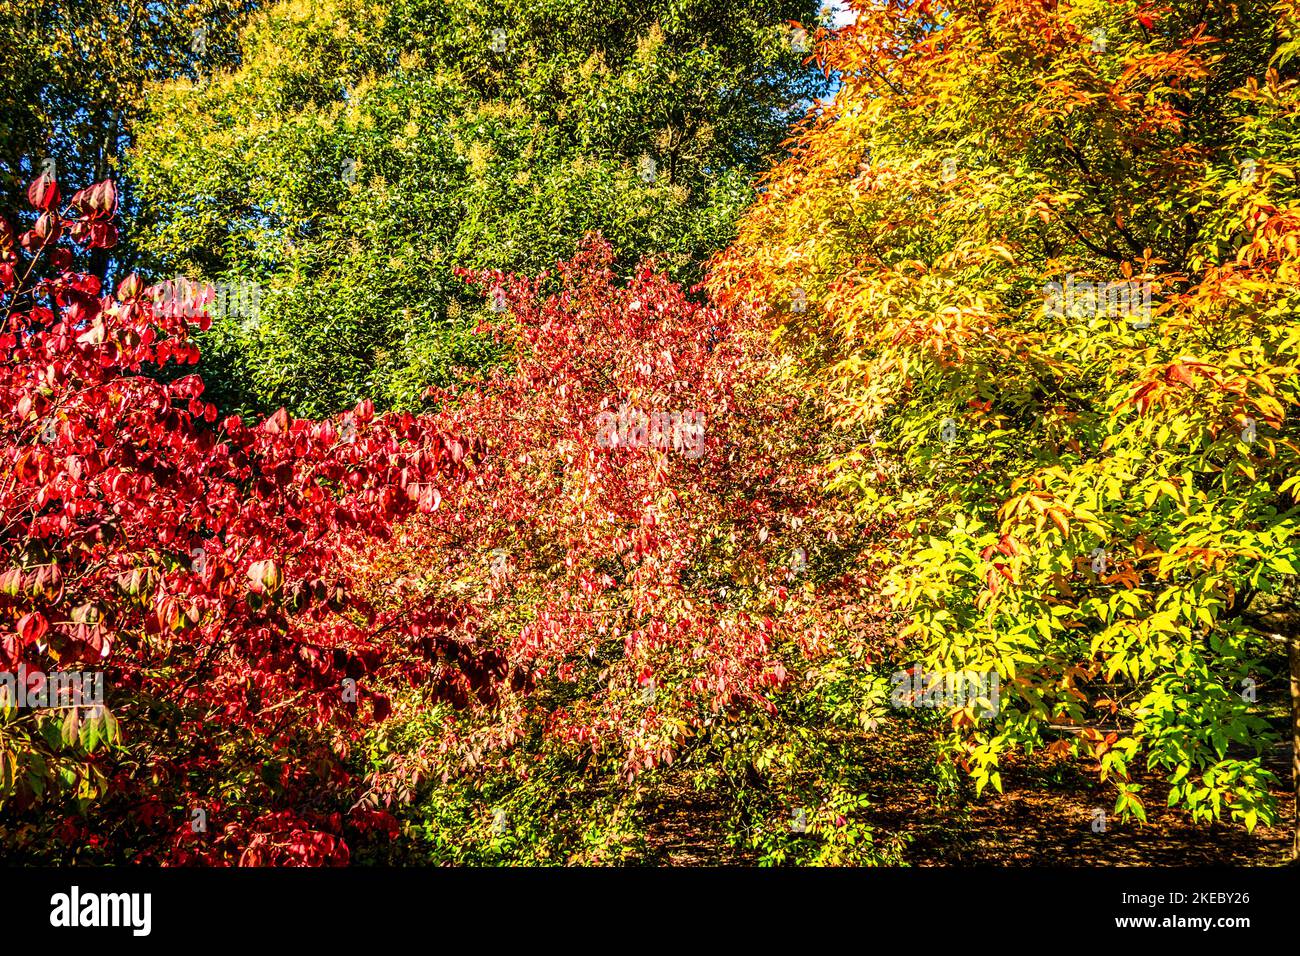 Brightly coloured autumn leaves glowing in the sunshine Stock Photo